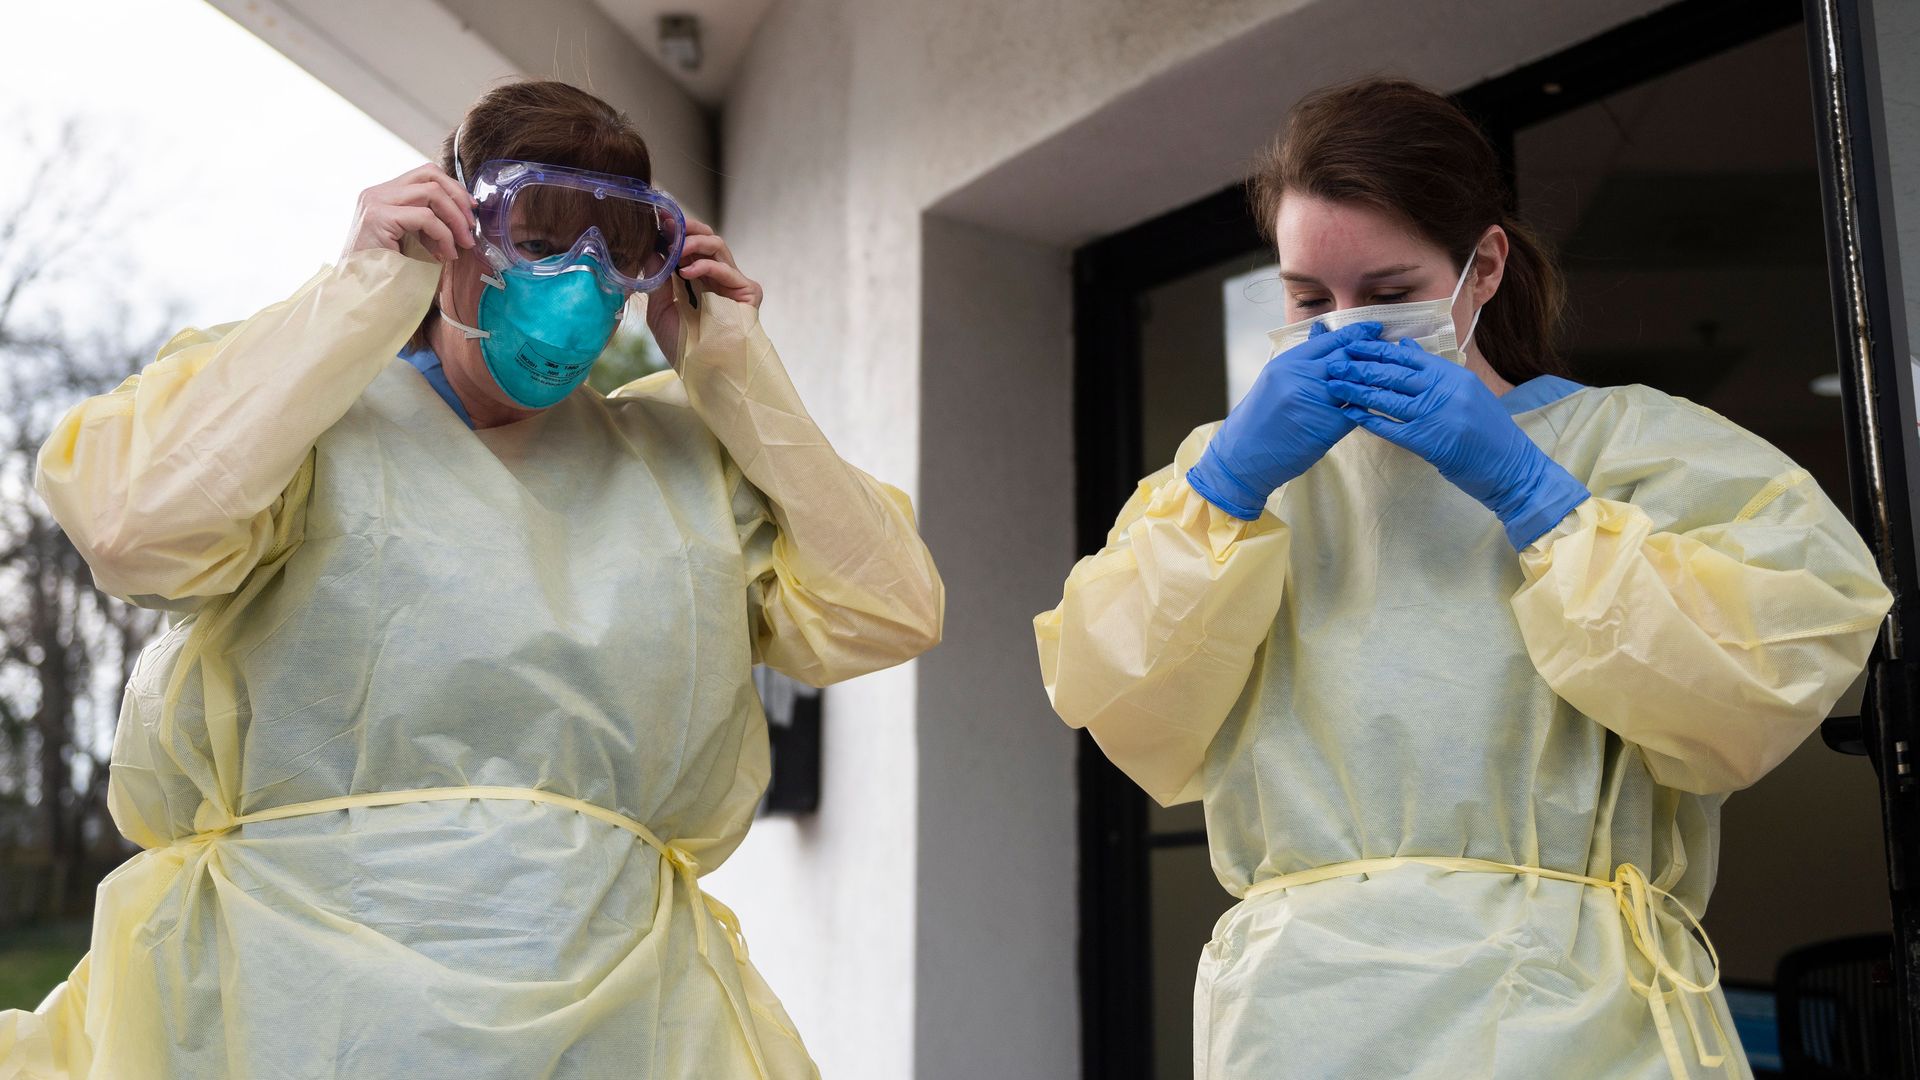 Health care workers from Virginia Hospital Center put on their personal protective equipment in Arlington County, Virginia. on March 20, 2020.